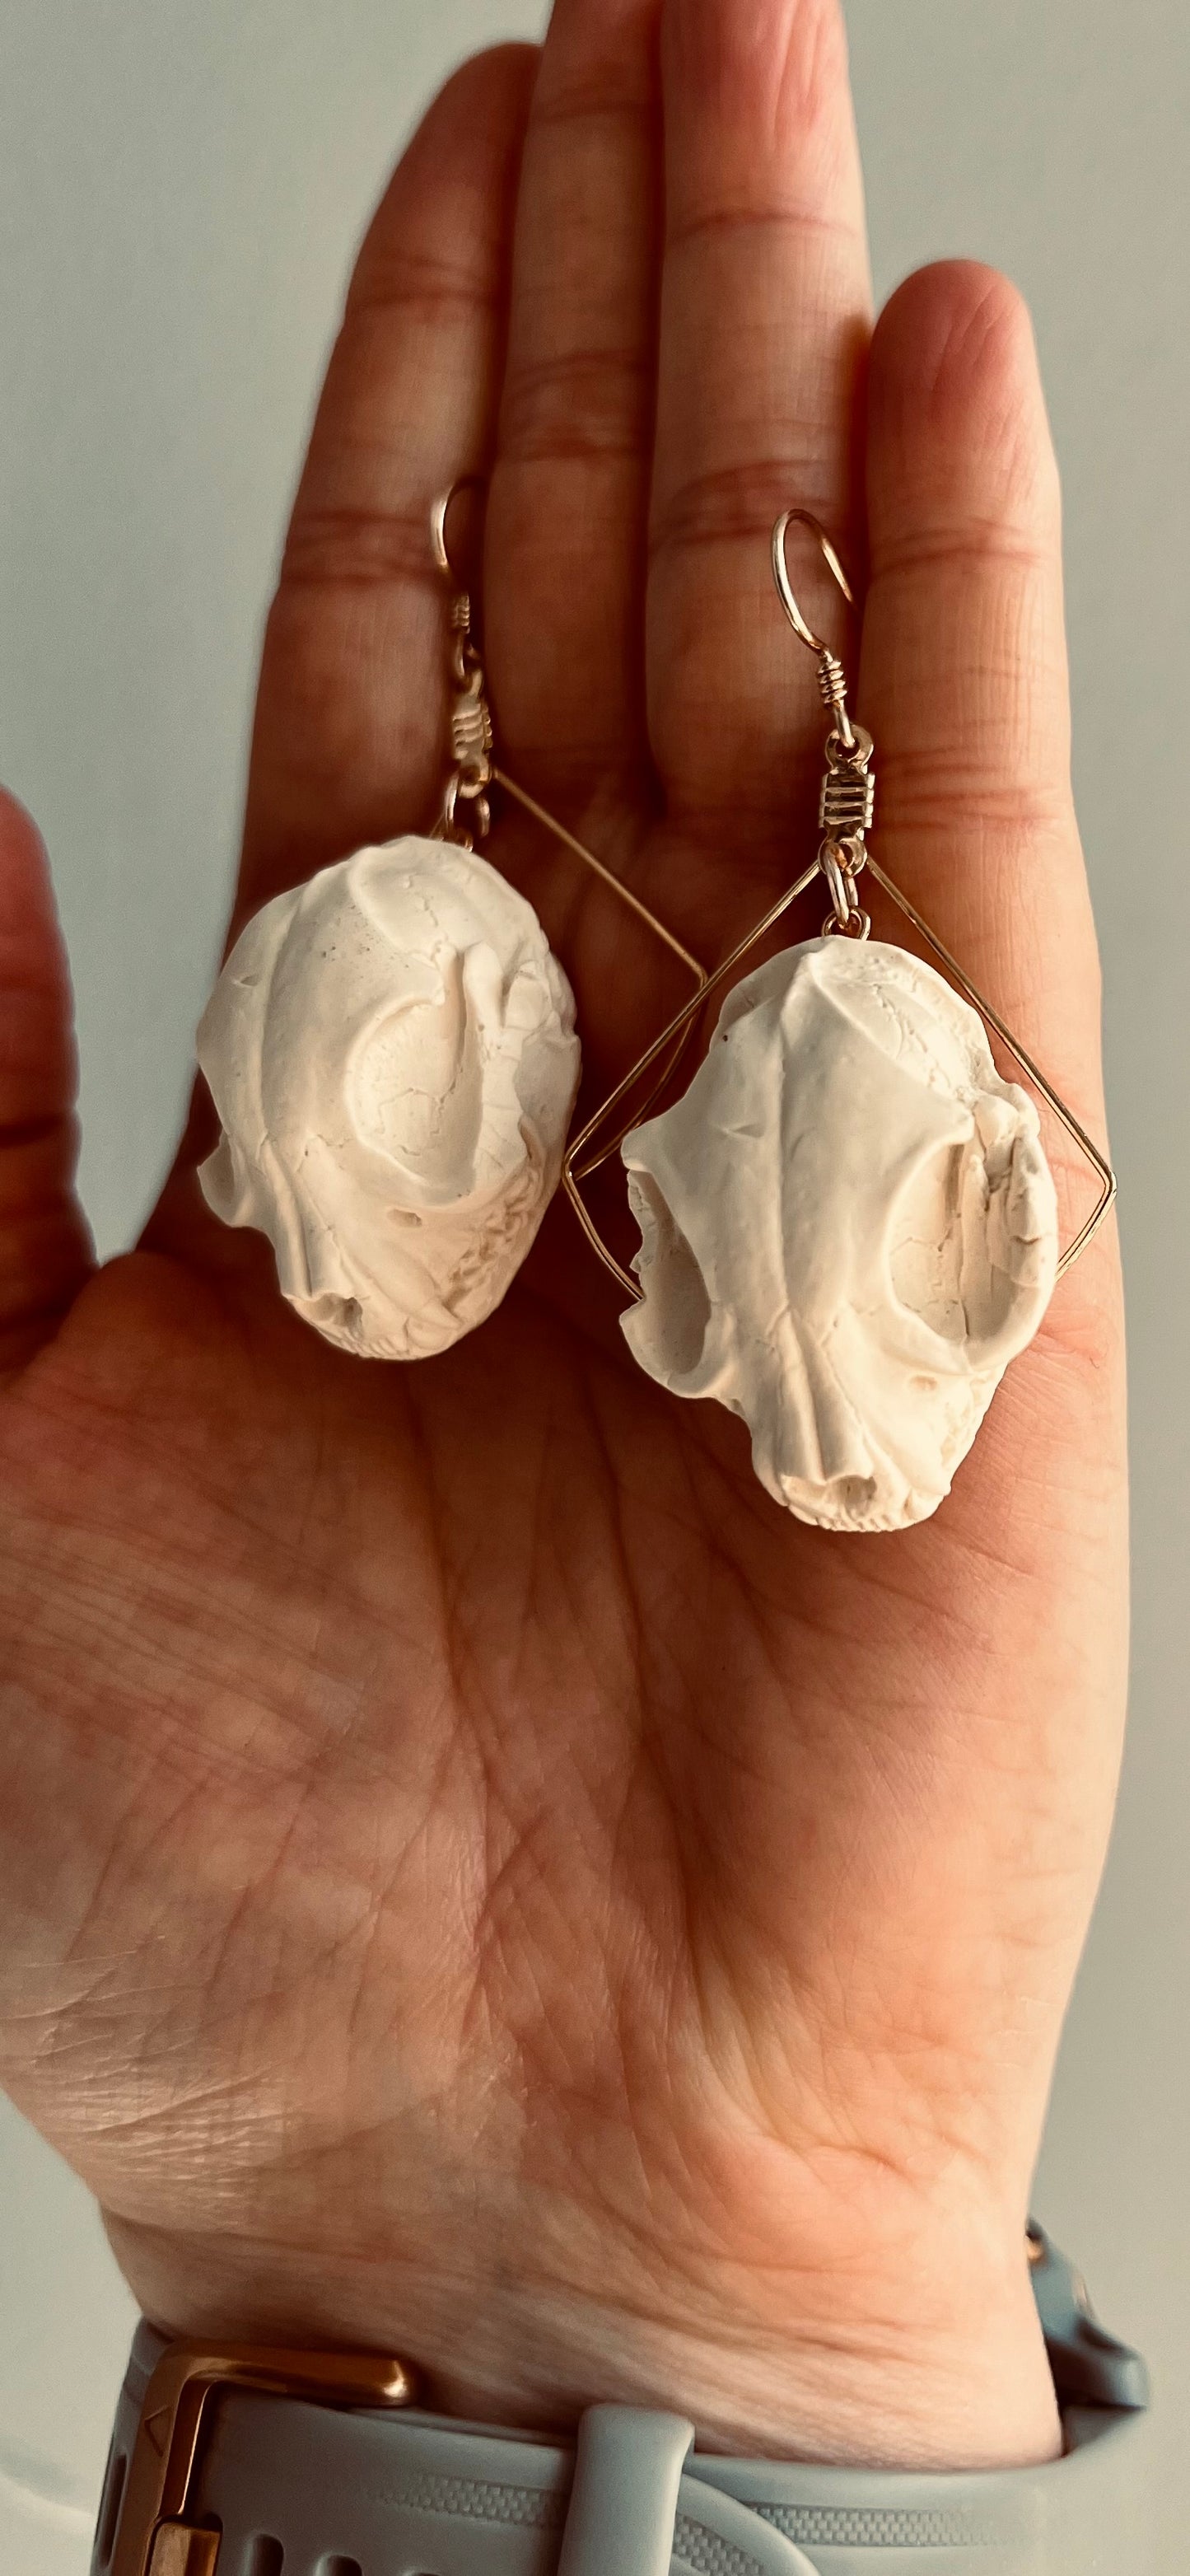 Capture the mystique of feline companionship with our polymer clay earrings featuring a cat skull design. These unique accessories pay homage to cats as human familiars, blending elegance with an edgy twist. Make a statement with these bold earrings that celebrate the deep bond between humans and their feline friends.